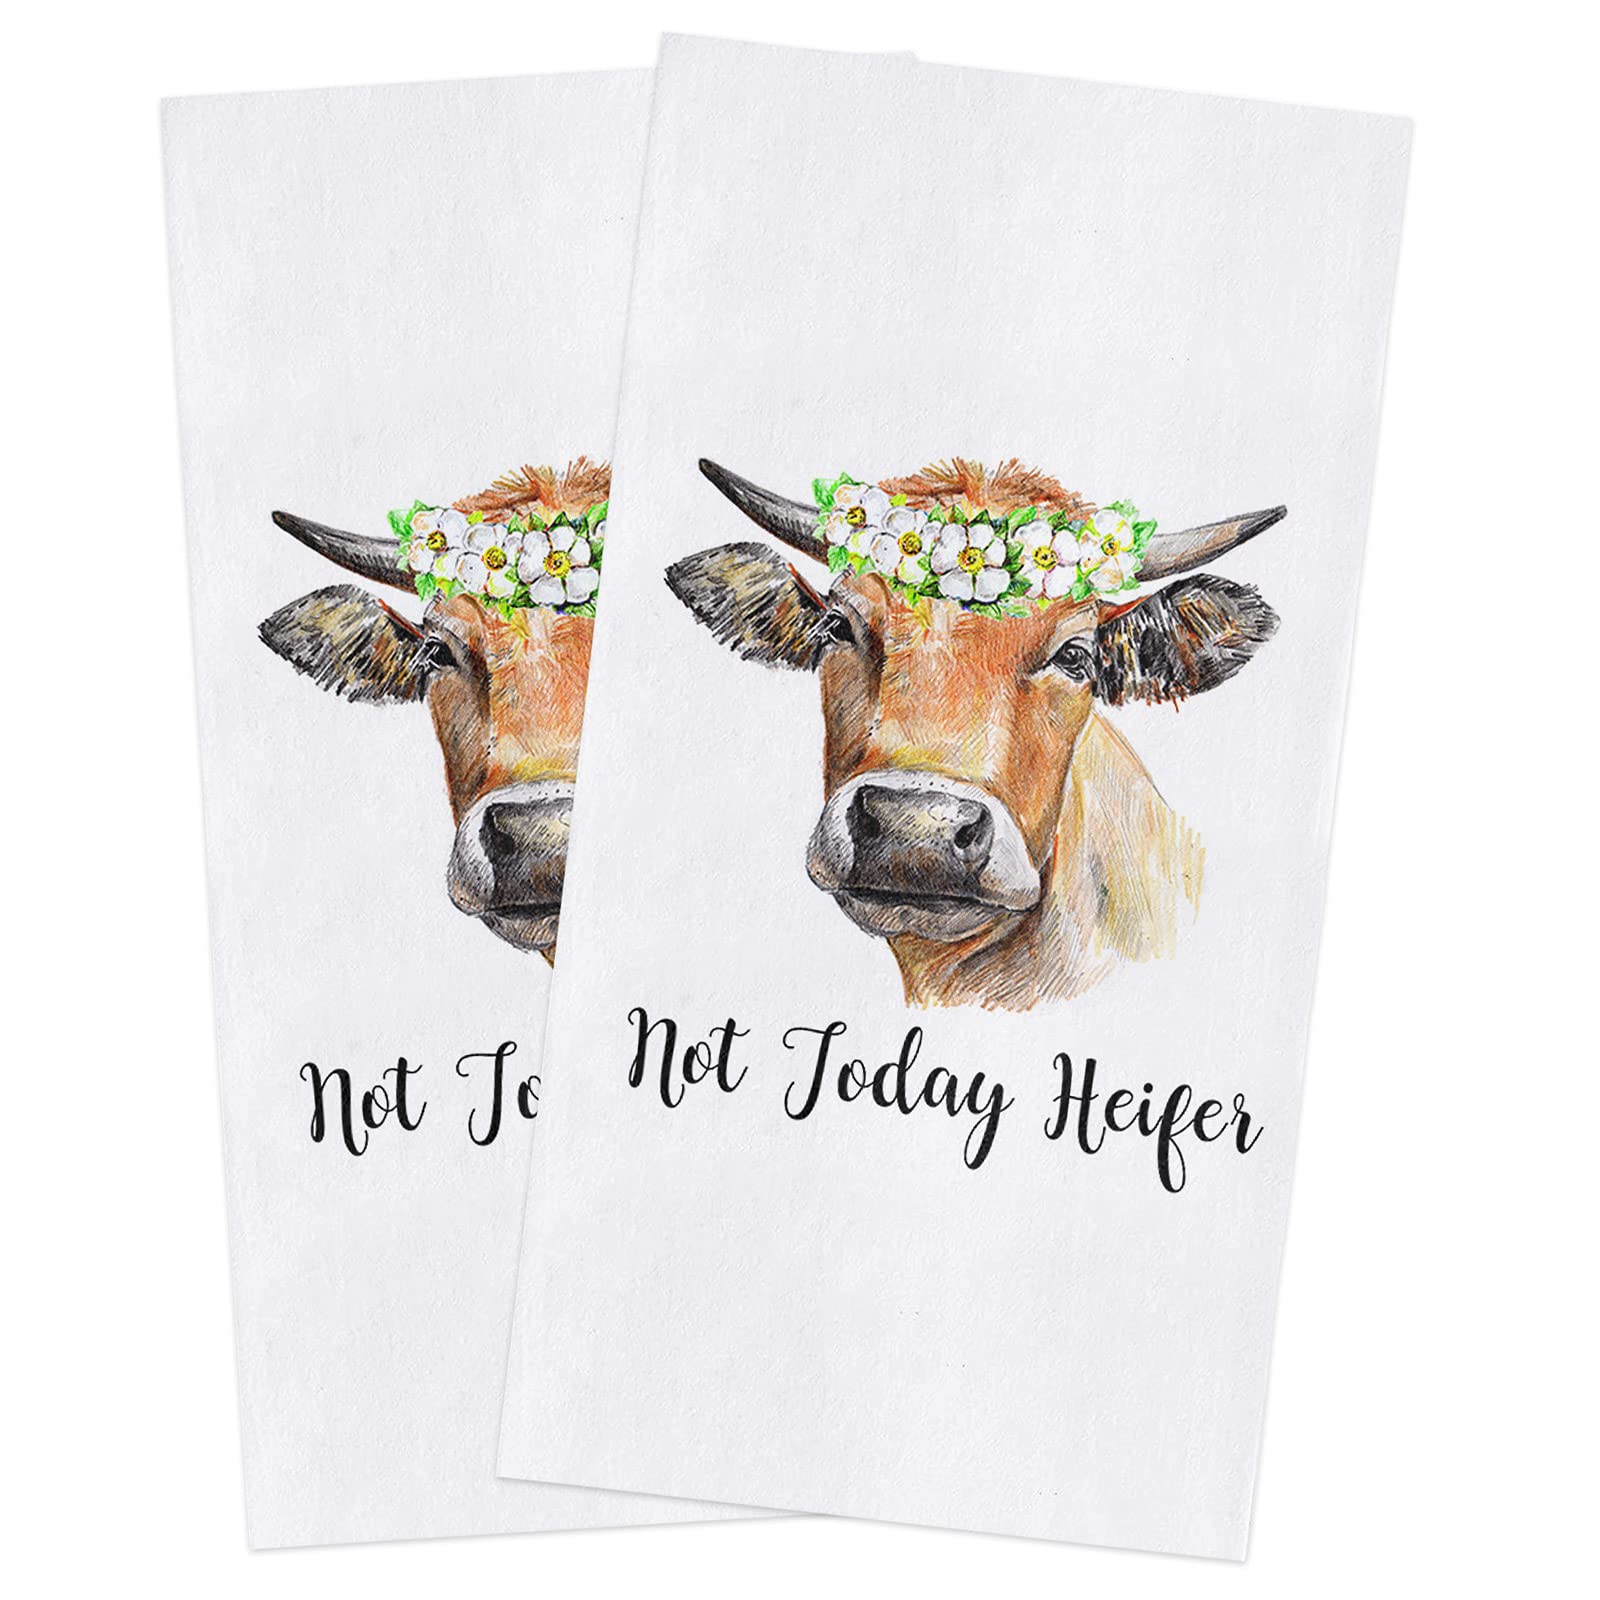 Zadaling Kitchen Towels,Not Today Heifer Flowers 16x28 Inches Soft Kitchen Dish Cloth,Cotton Tea Towels/Bar Towels/Hand Towels,(2 Pack)